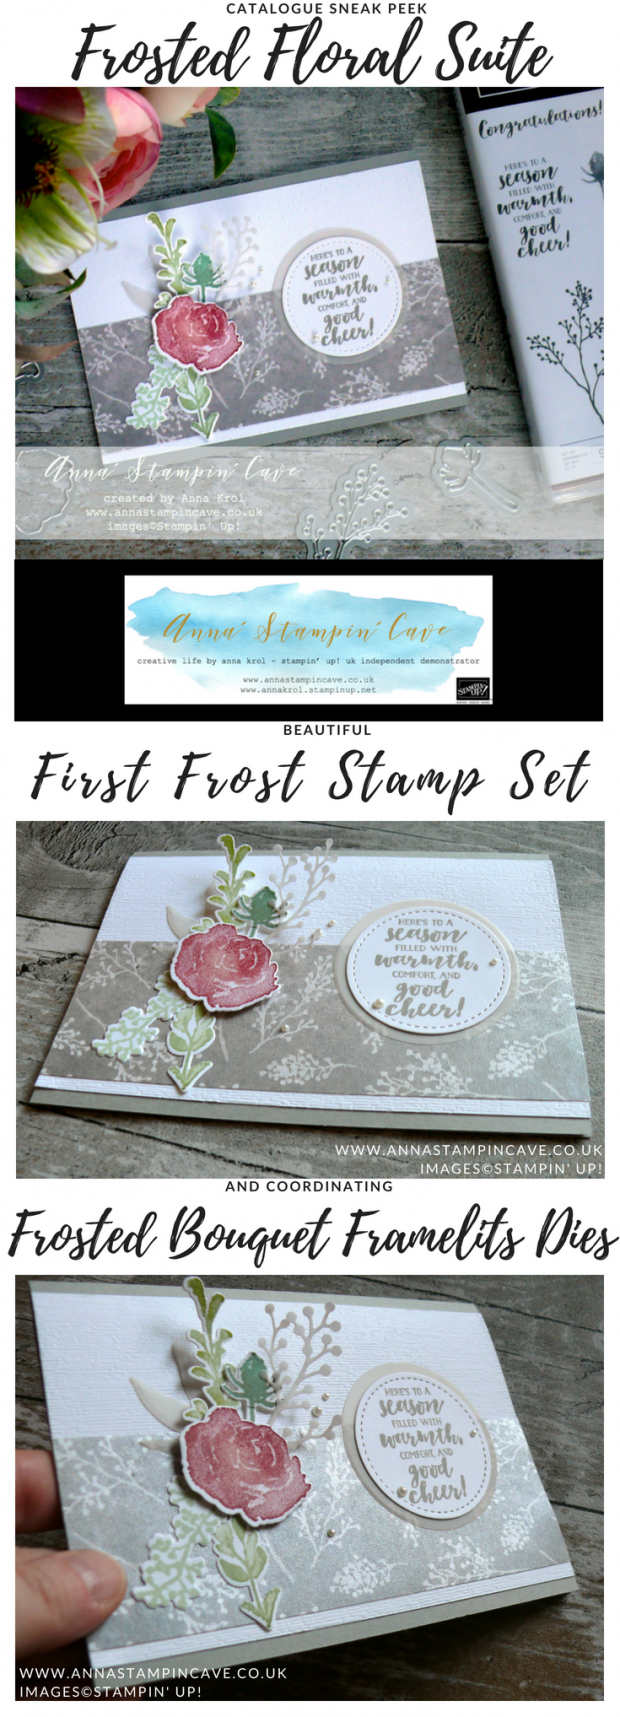 Anna' Stampin' Cave - Stampin' Up! Sneak Peek First Frost Stamp Set with Frosted Bouquet Framelits Dies and Frosted Floral Specialty DSP